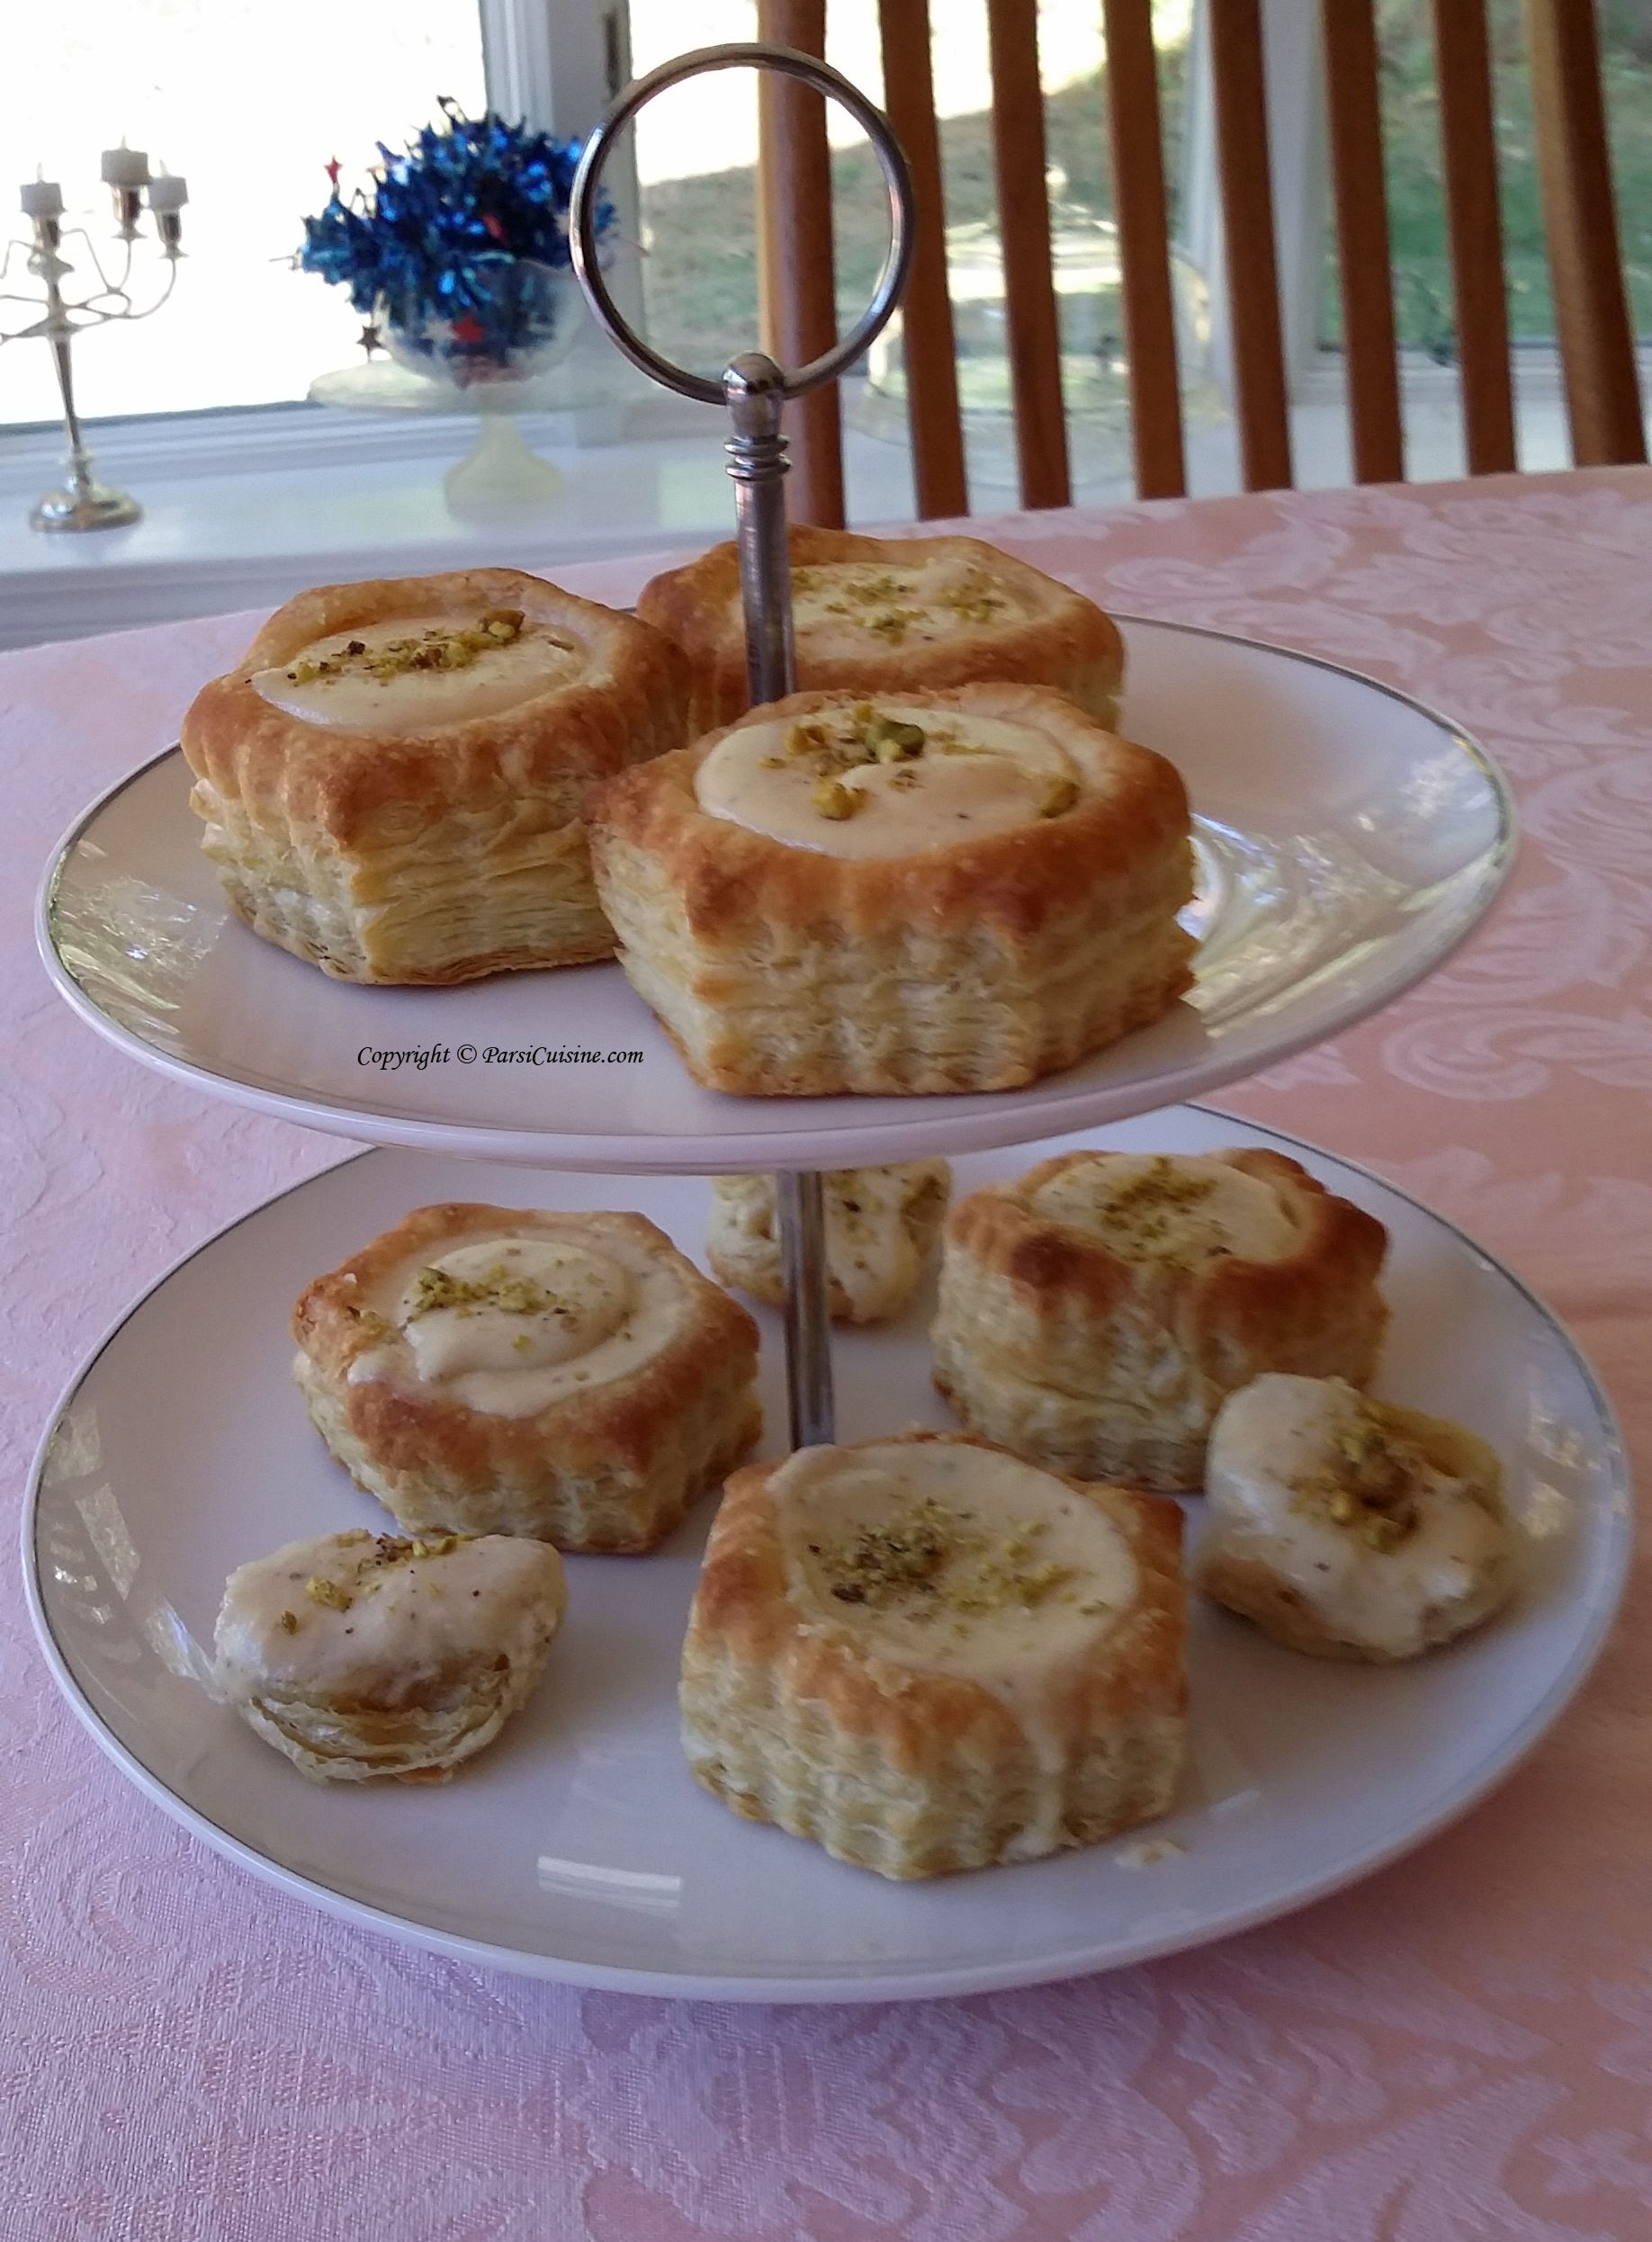 Pastry filled with Cream or Malai Khaaja